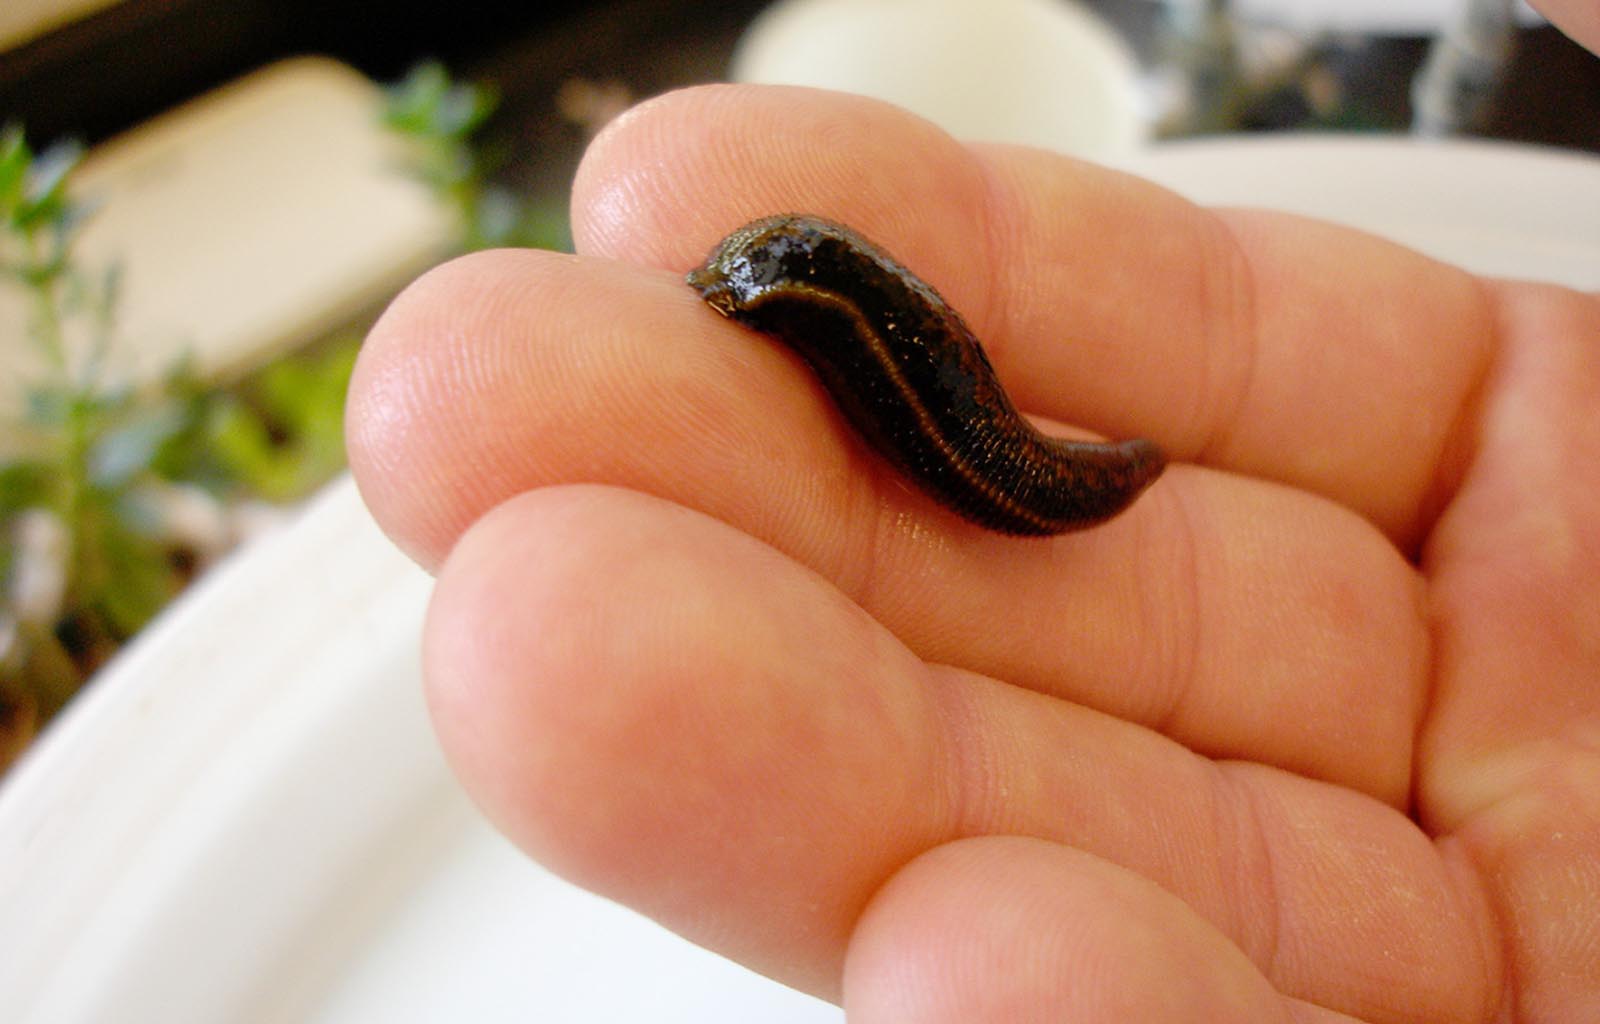 A dark leech is lying on a human hand. The leech is about half the length of the hand's middle finger.